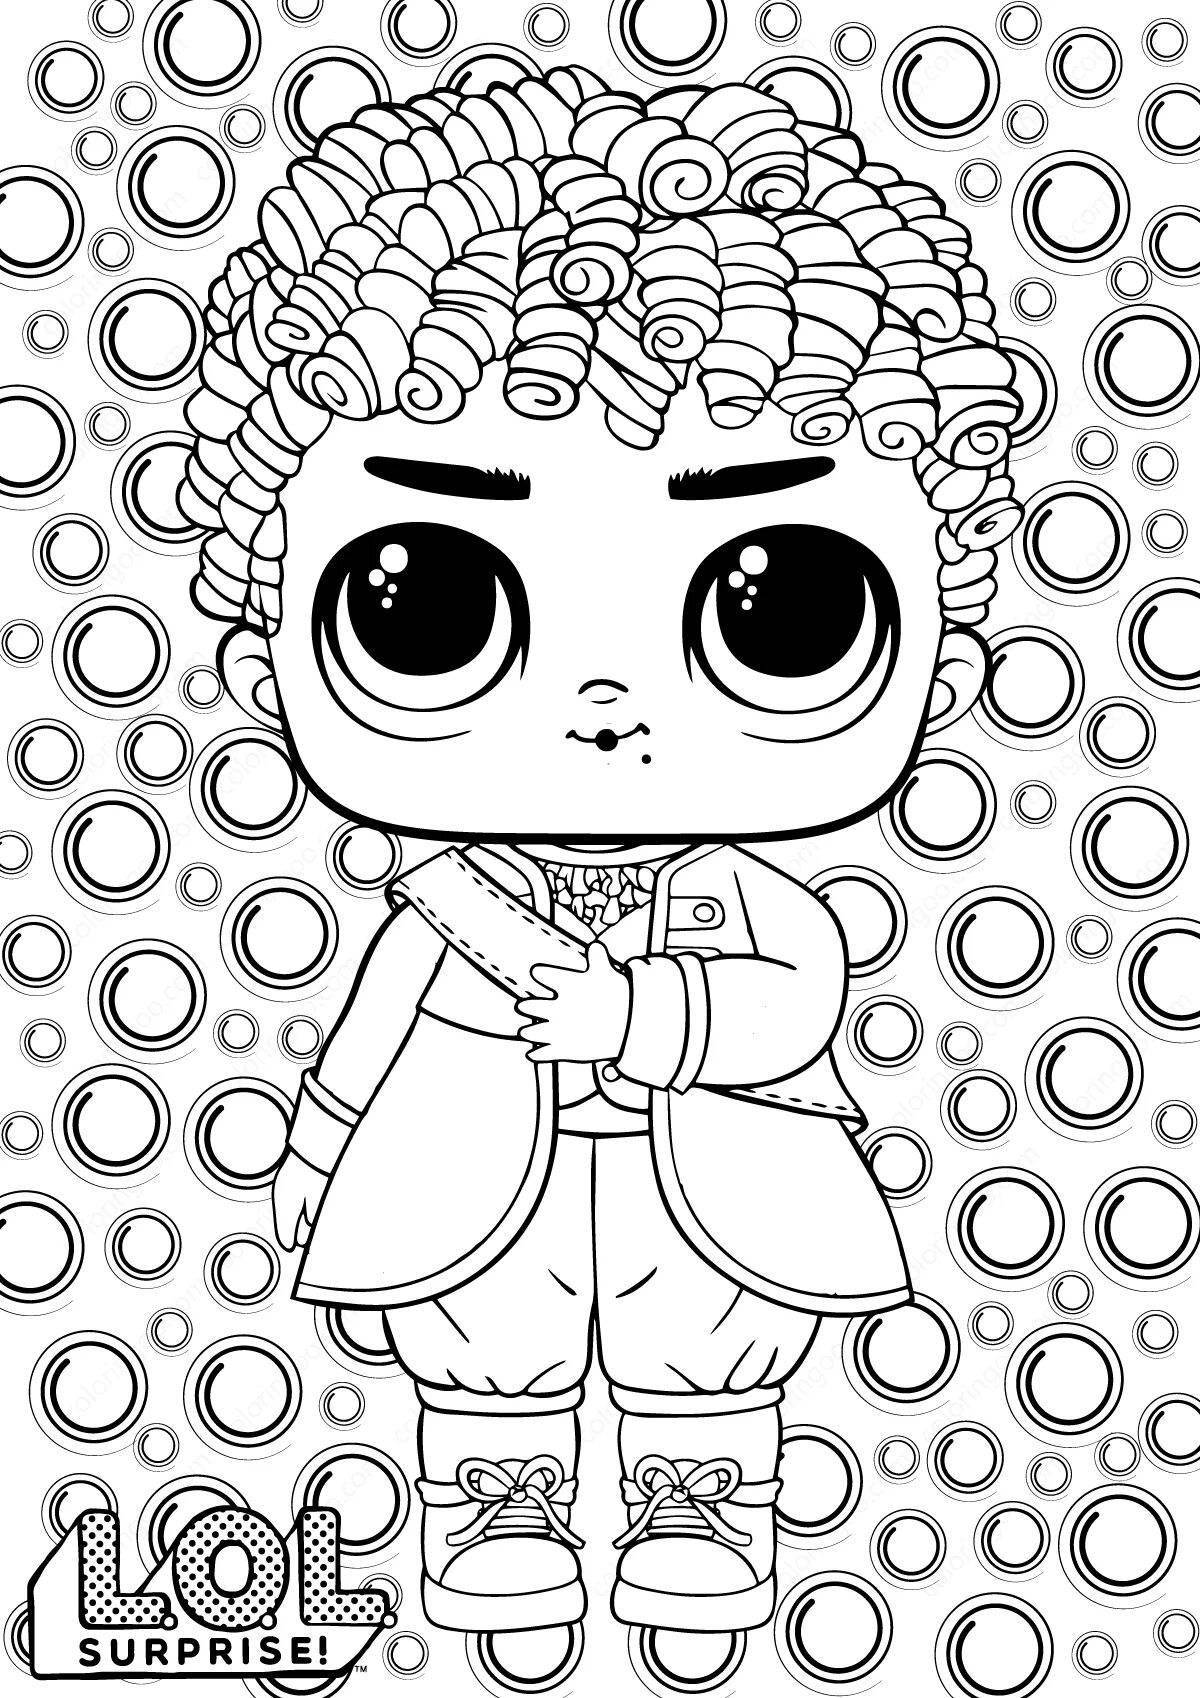 Radiant coloring page boy lol omg